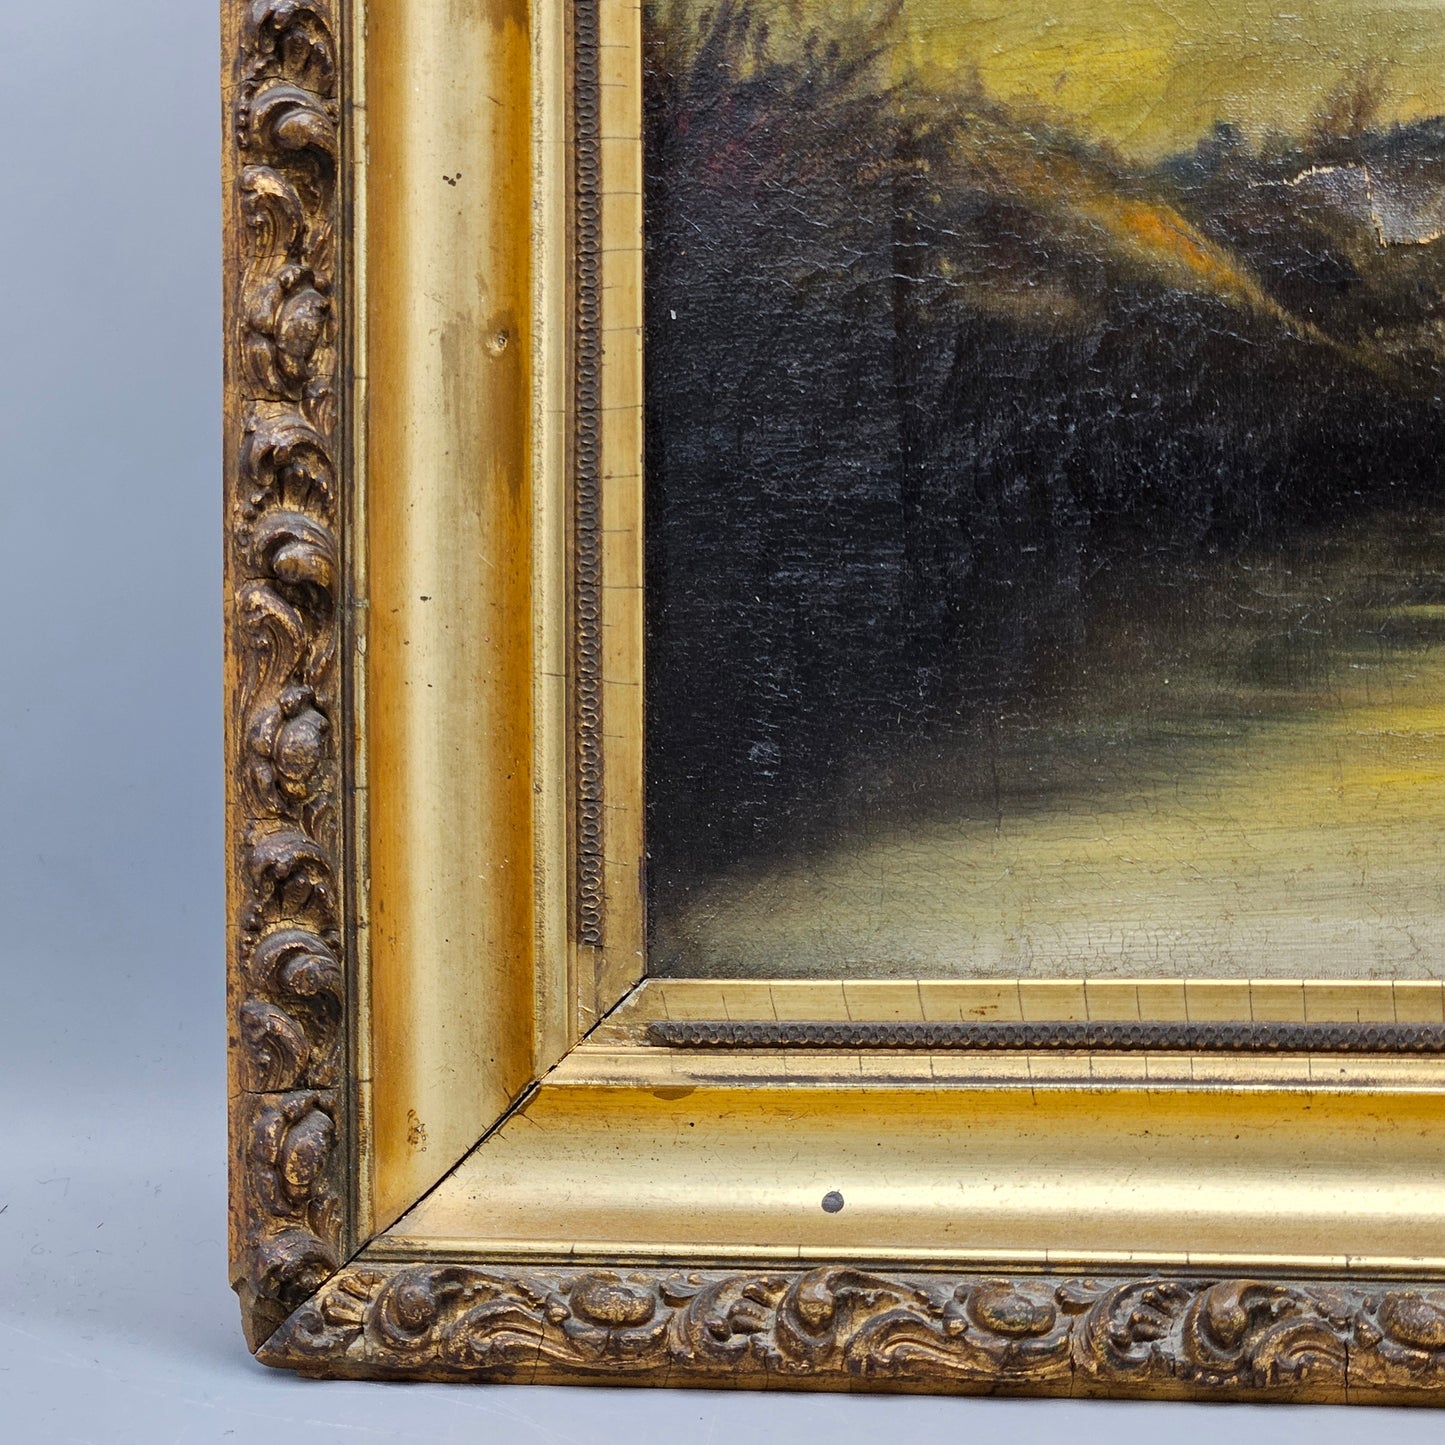 Antique Oil on Canvas Landscape Painting of Lake with Trees